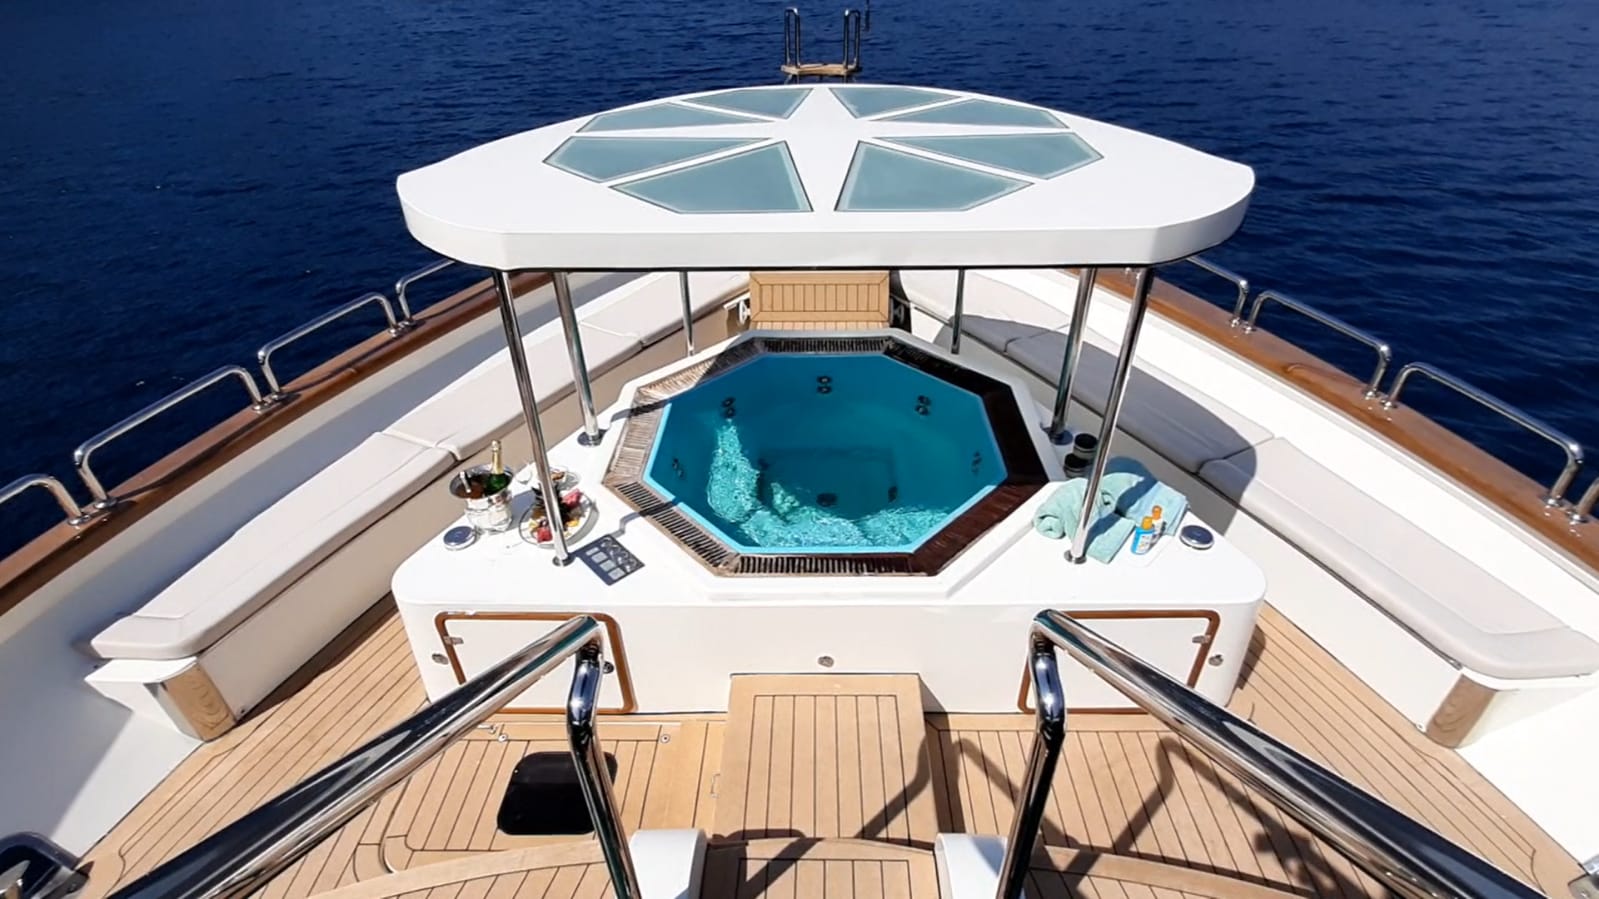 Shaded spa pool on foredeck